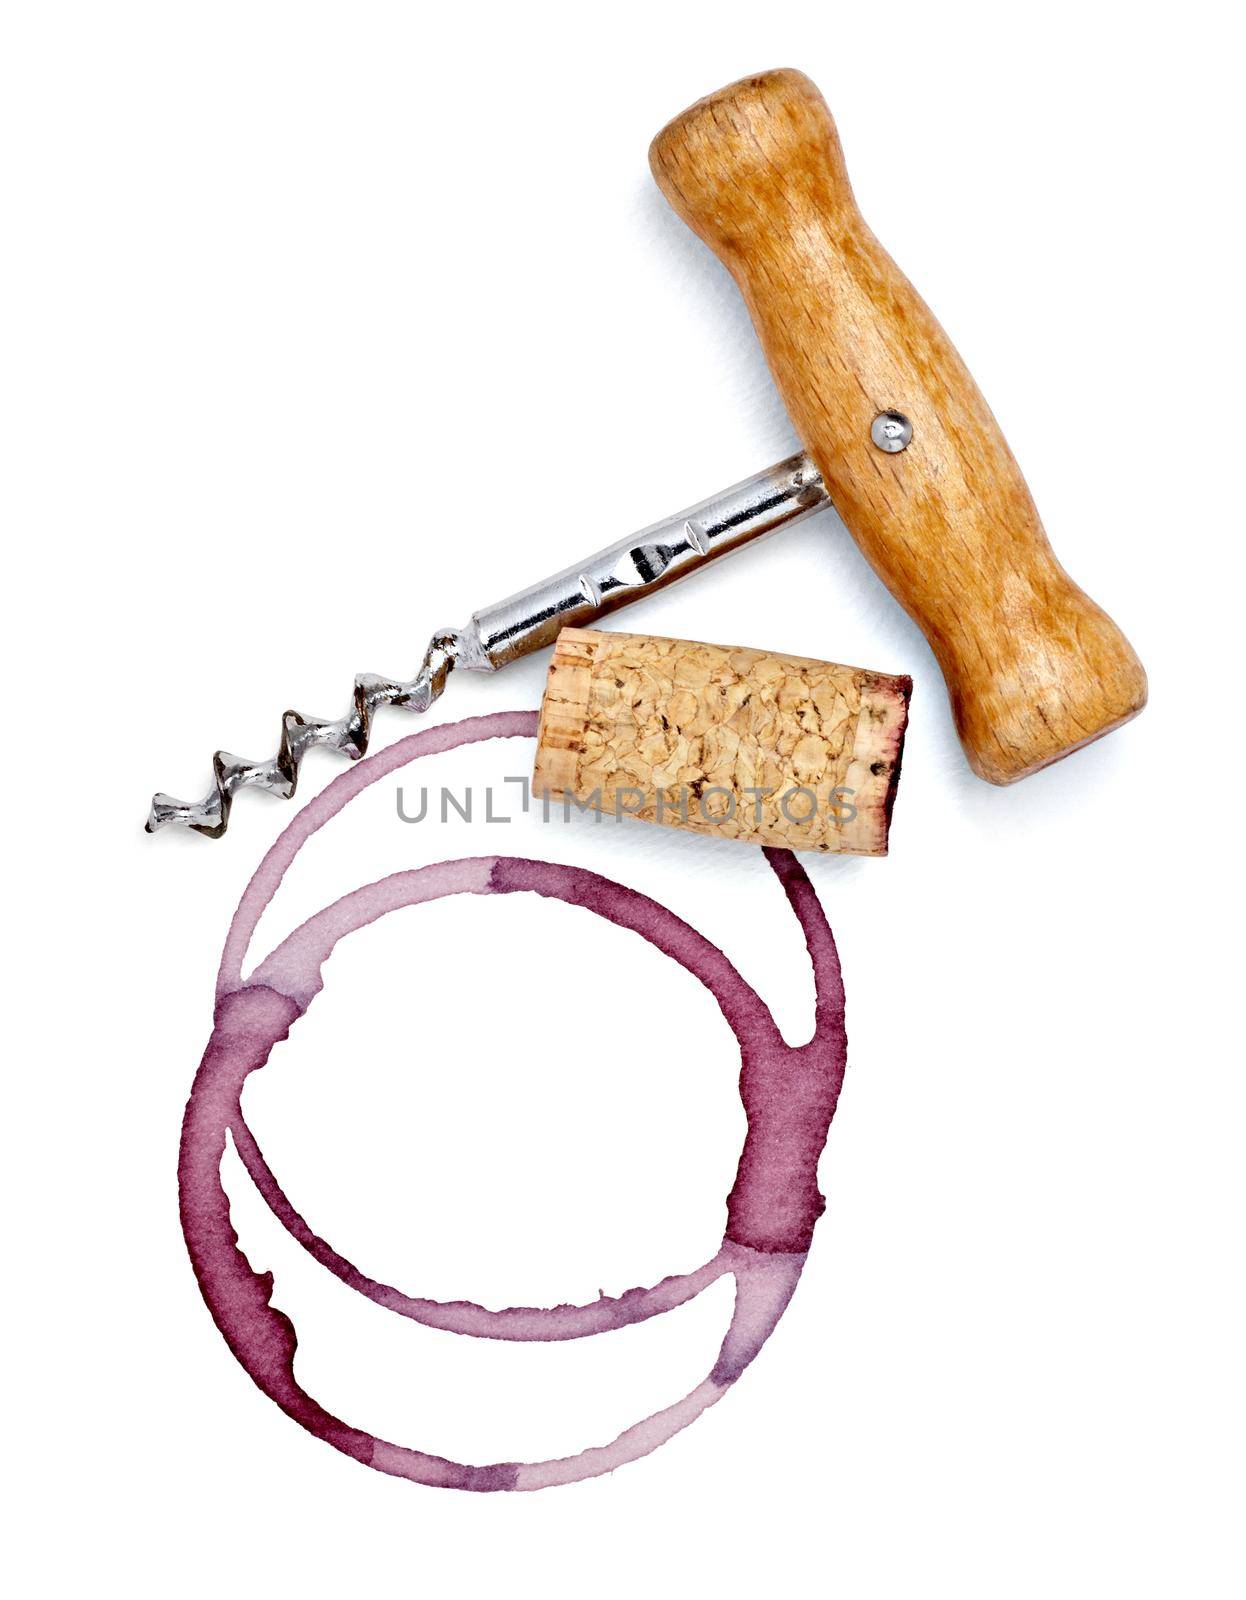 close up of a wine stain and corkscrew and cork cap on white background